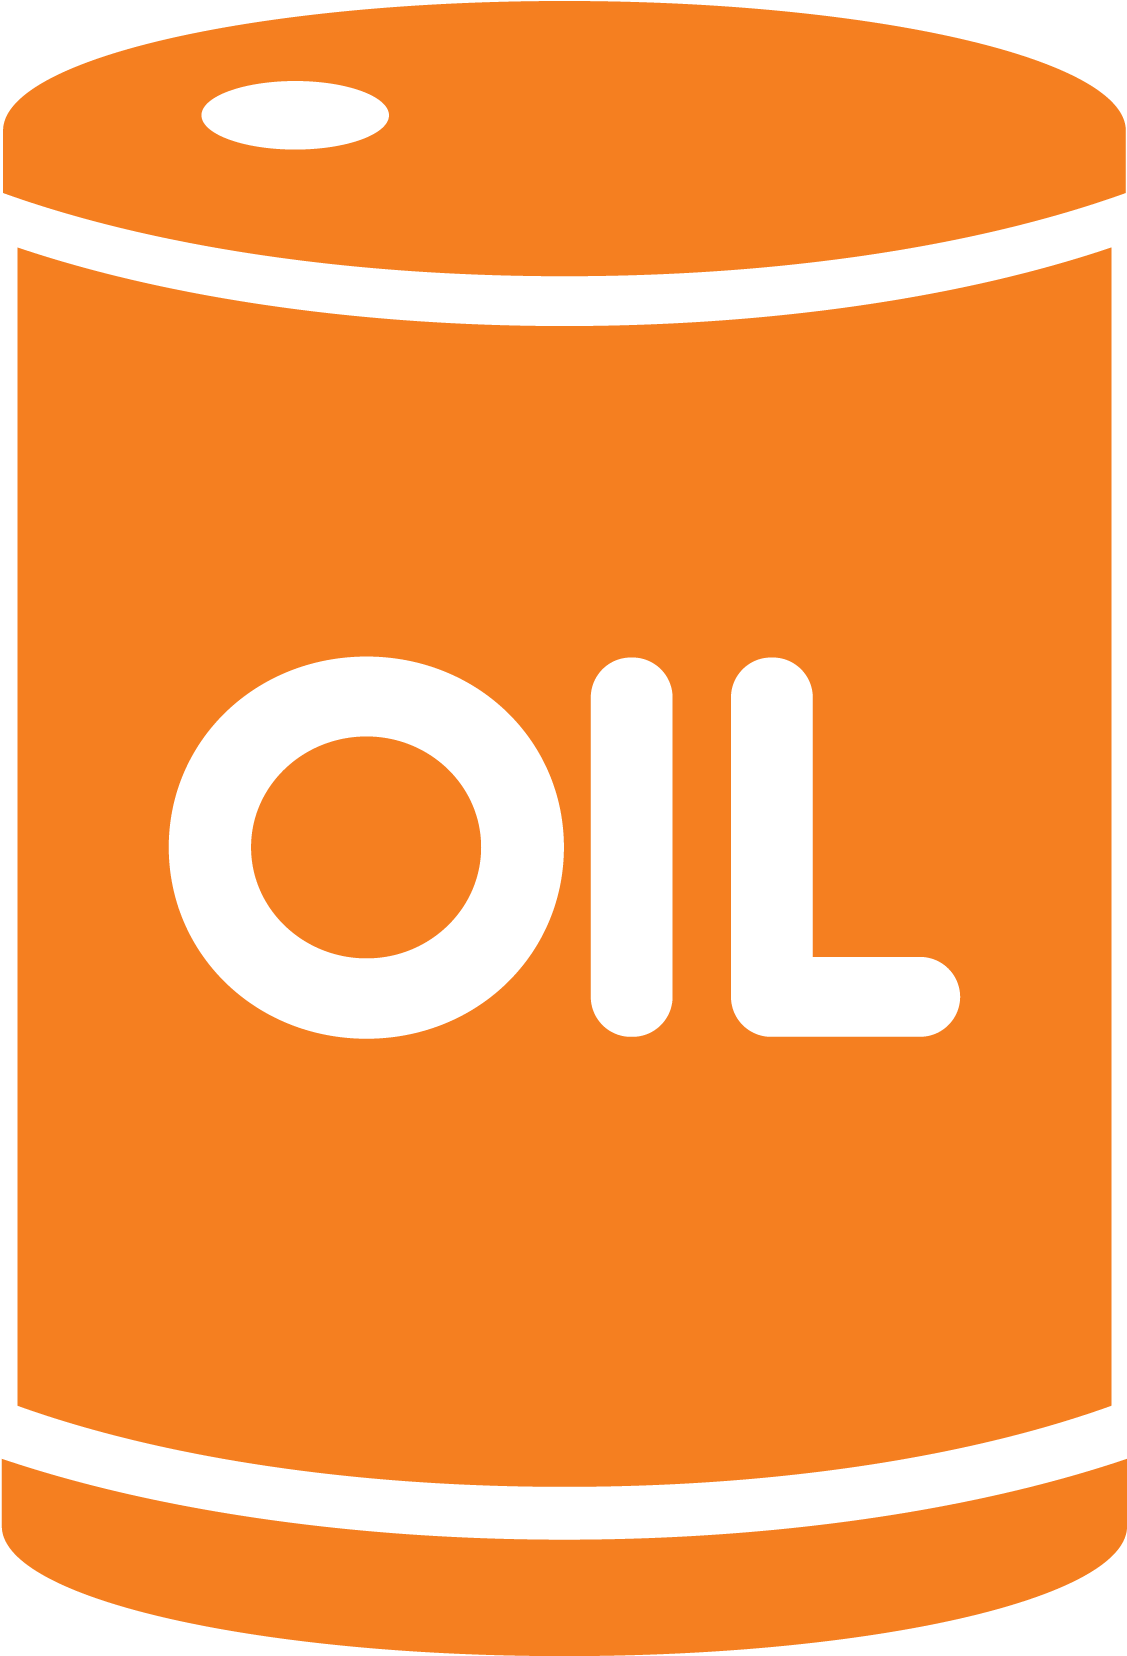 List Of Products And Services - Petroleum (1655x1655)